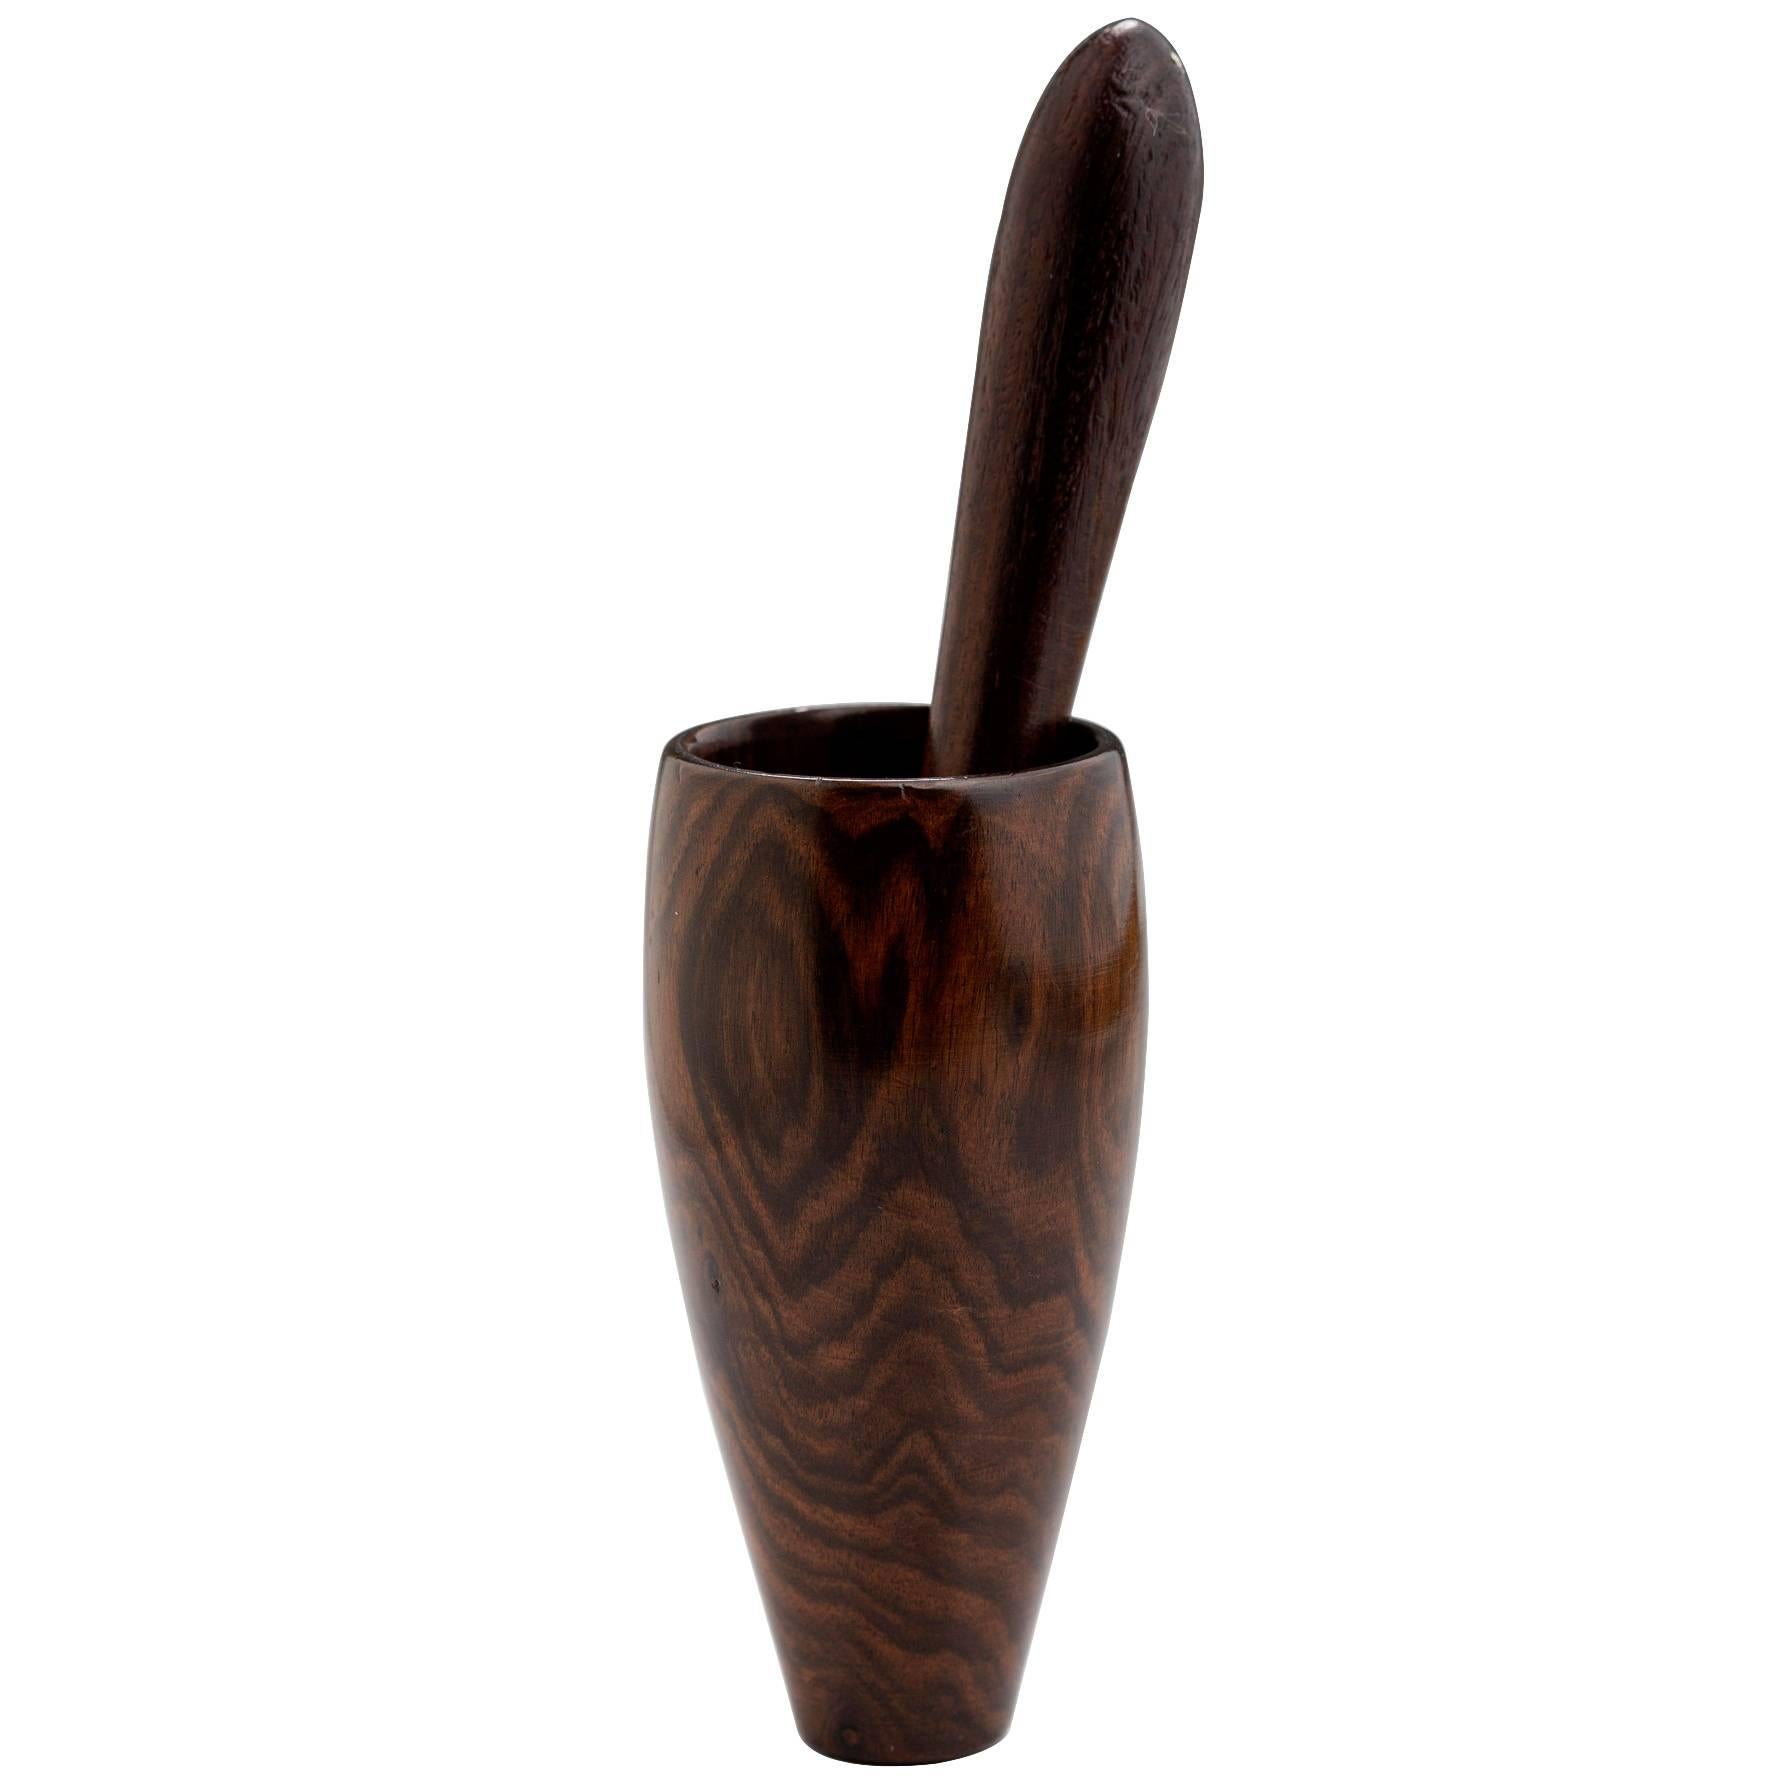 English Rosewood Mortar and Pestle for Snuff/Tobacco Accessories, 19th Century For Sale